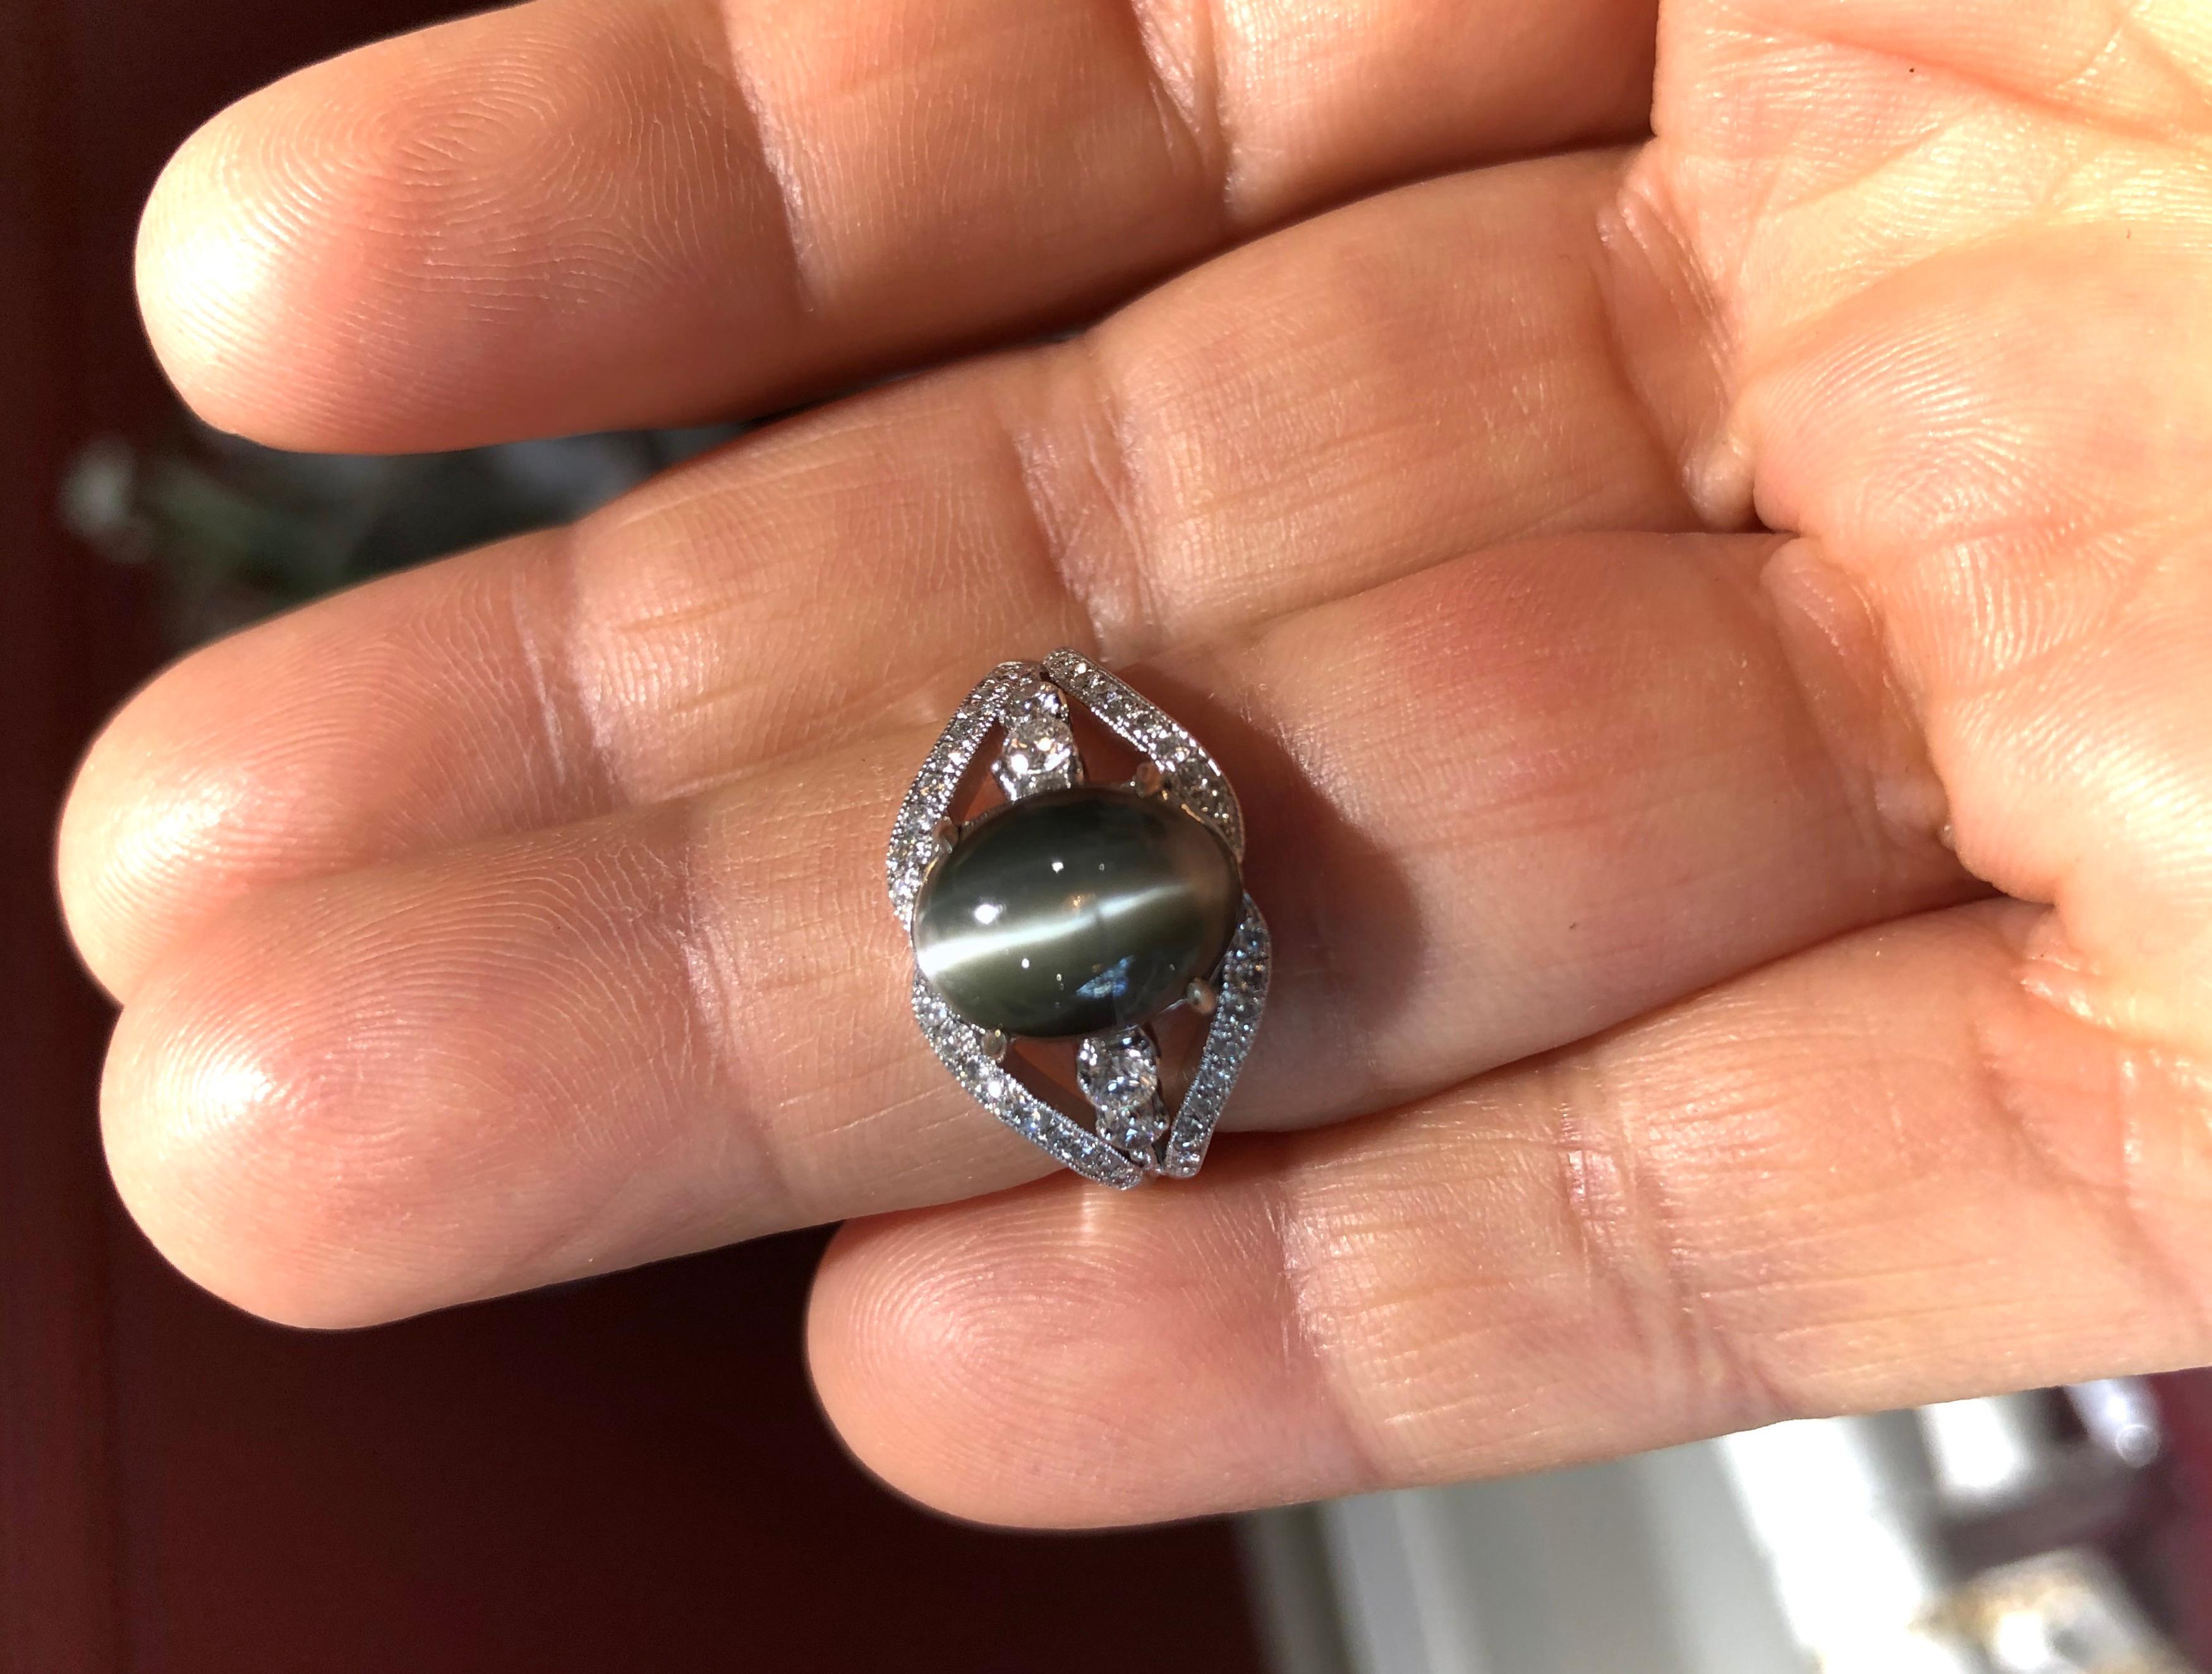 Classic and finely detailed oval cabochon Alexandrite Cat's Eye ring accent whit diamonds, the ring is made of 18K white gold.

Alexandrite Cat's Eye (Chrysoberyl) 5.60 carat

Diamonds F-G/SI1 3/8 carat

Total gemstone weight 6.00 carats

Total ring